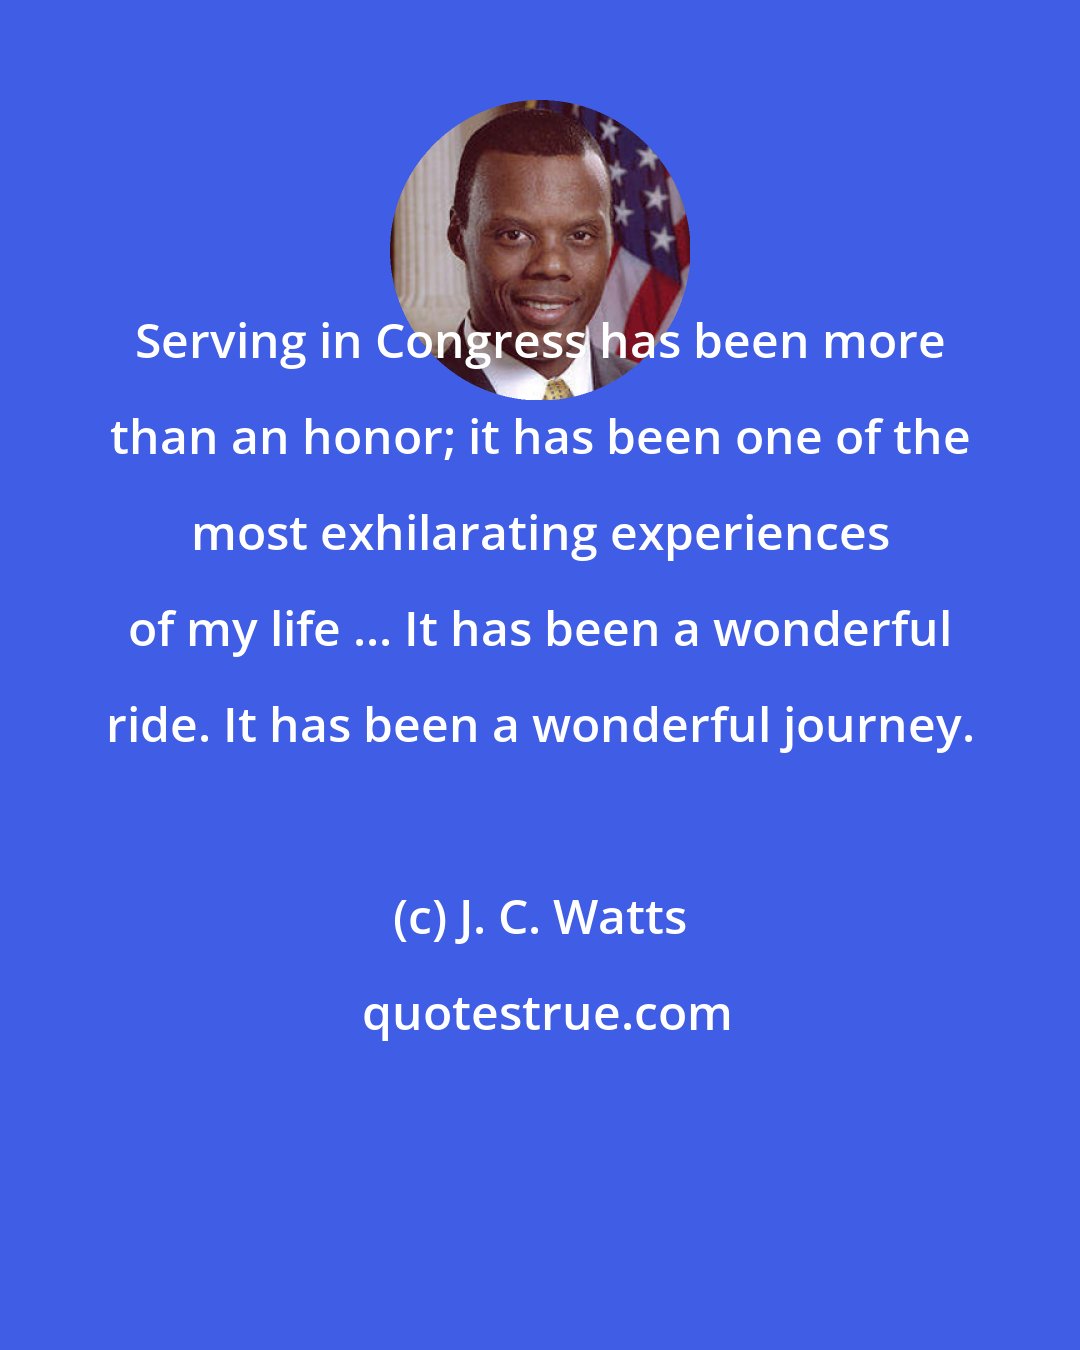 J. C. Watts: Serving in Congress has been more than an honor; it has been one of the most exhilarating experiences of my life ... It has been a wonderful ride. It has been a wonderful journey.